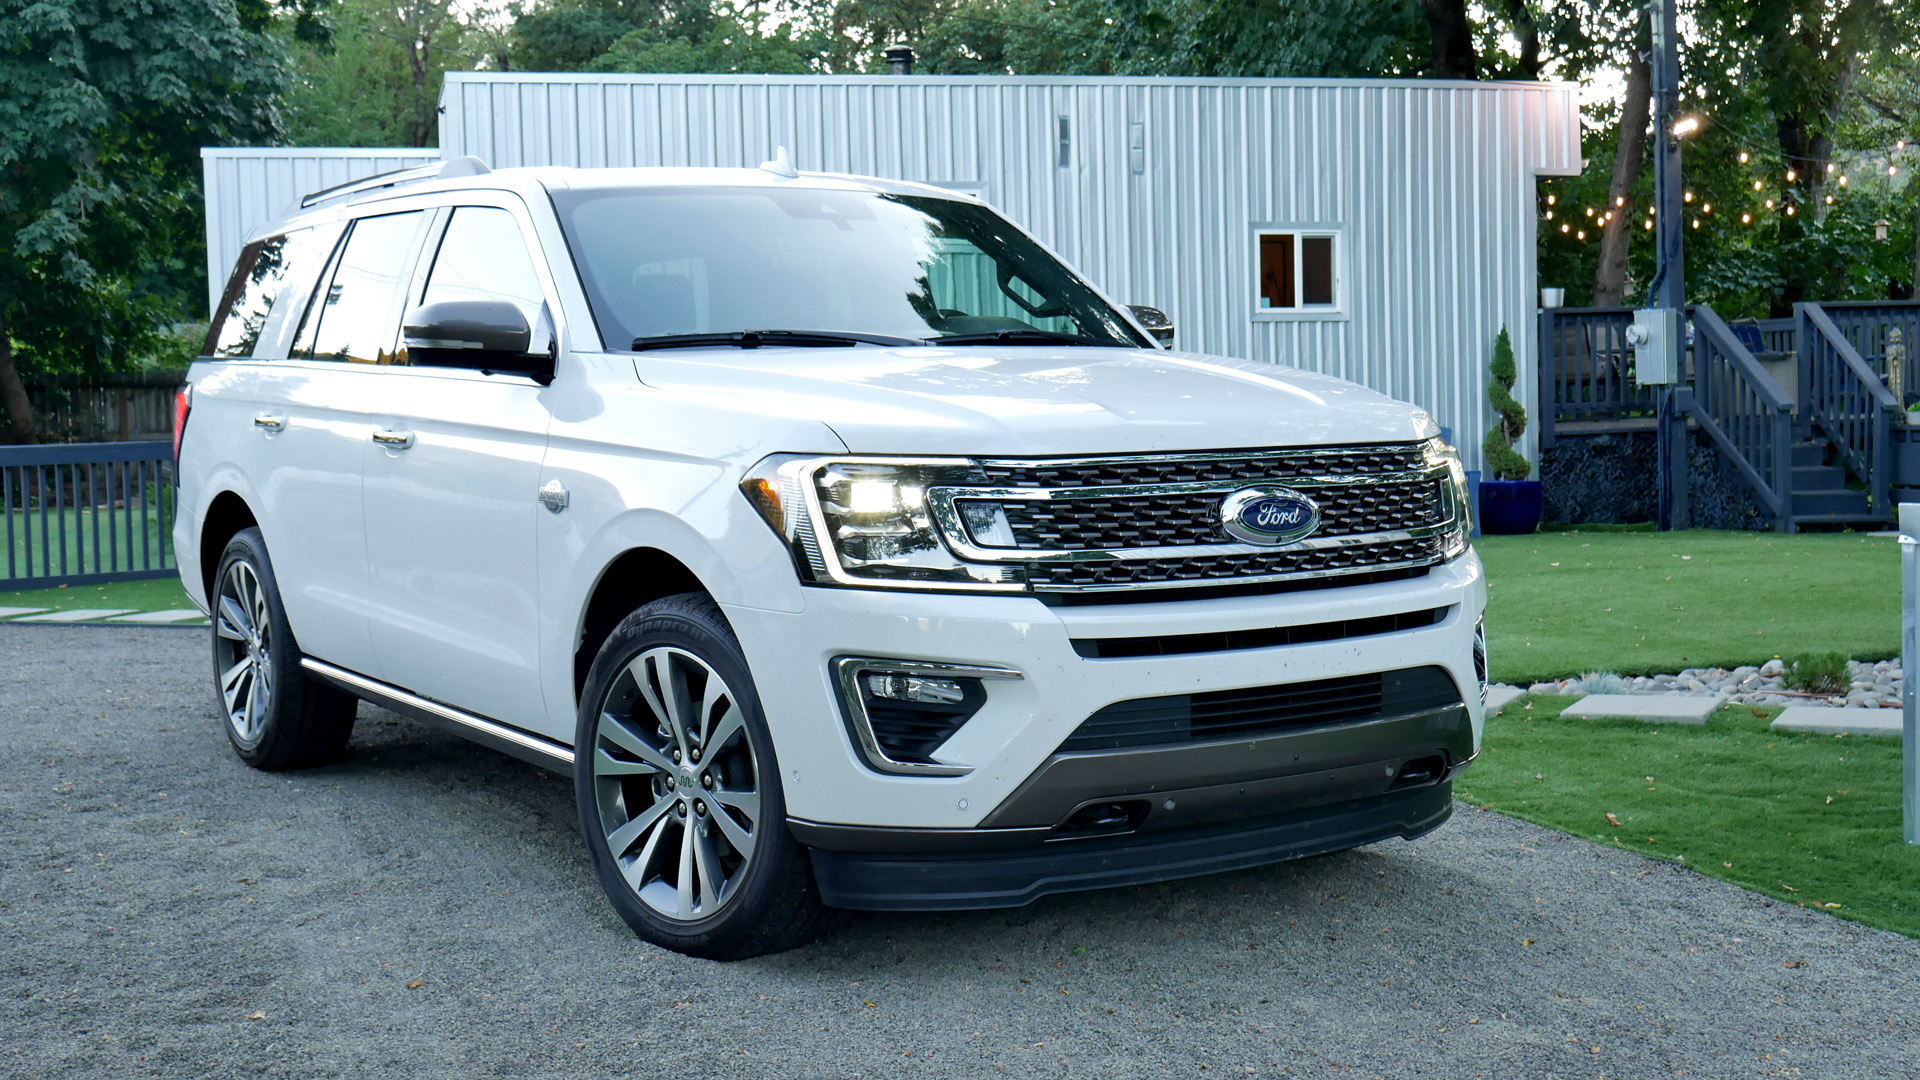 2021 Ford Expedition Review | Price, specs, features and photos - Autoblog